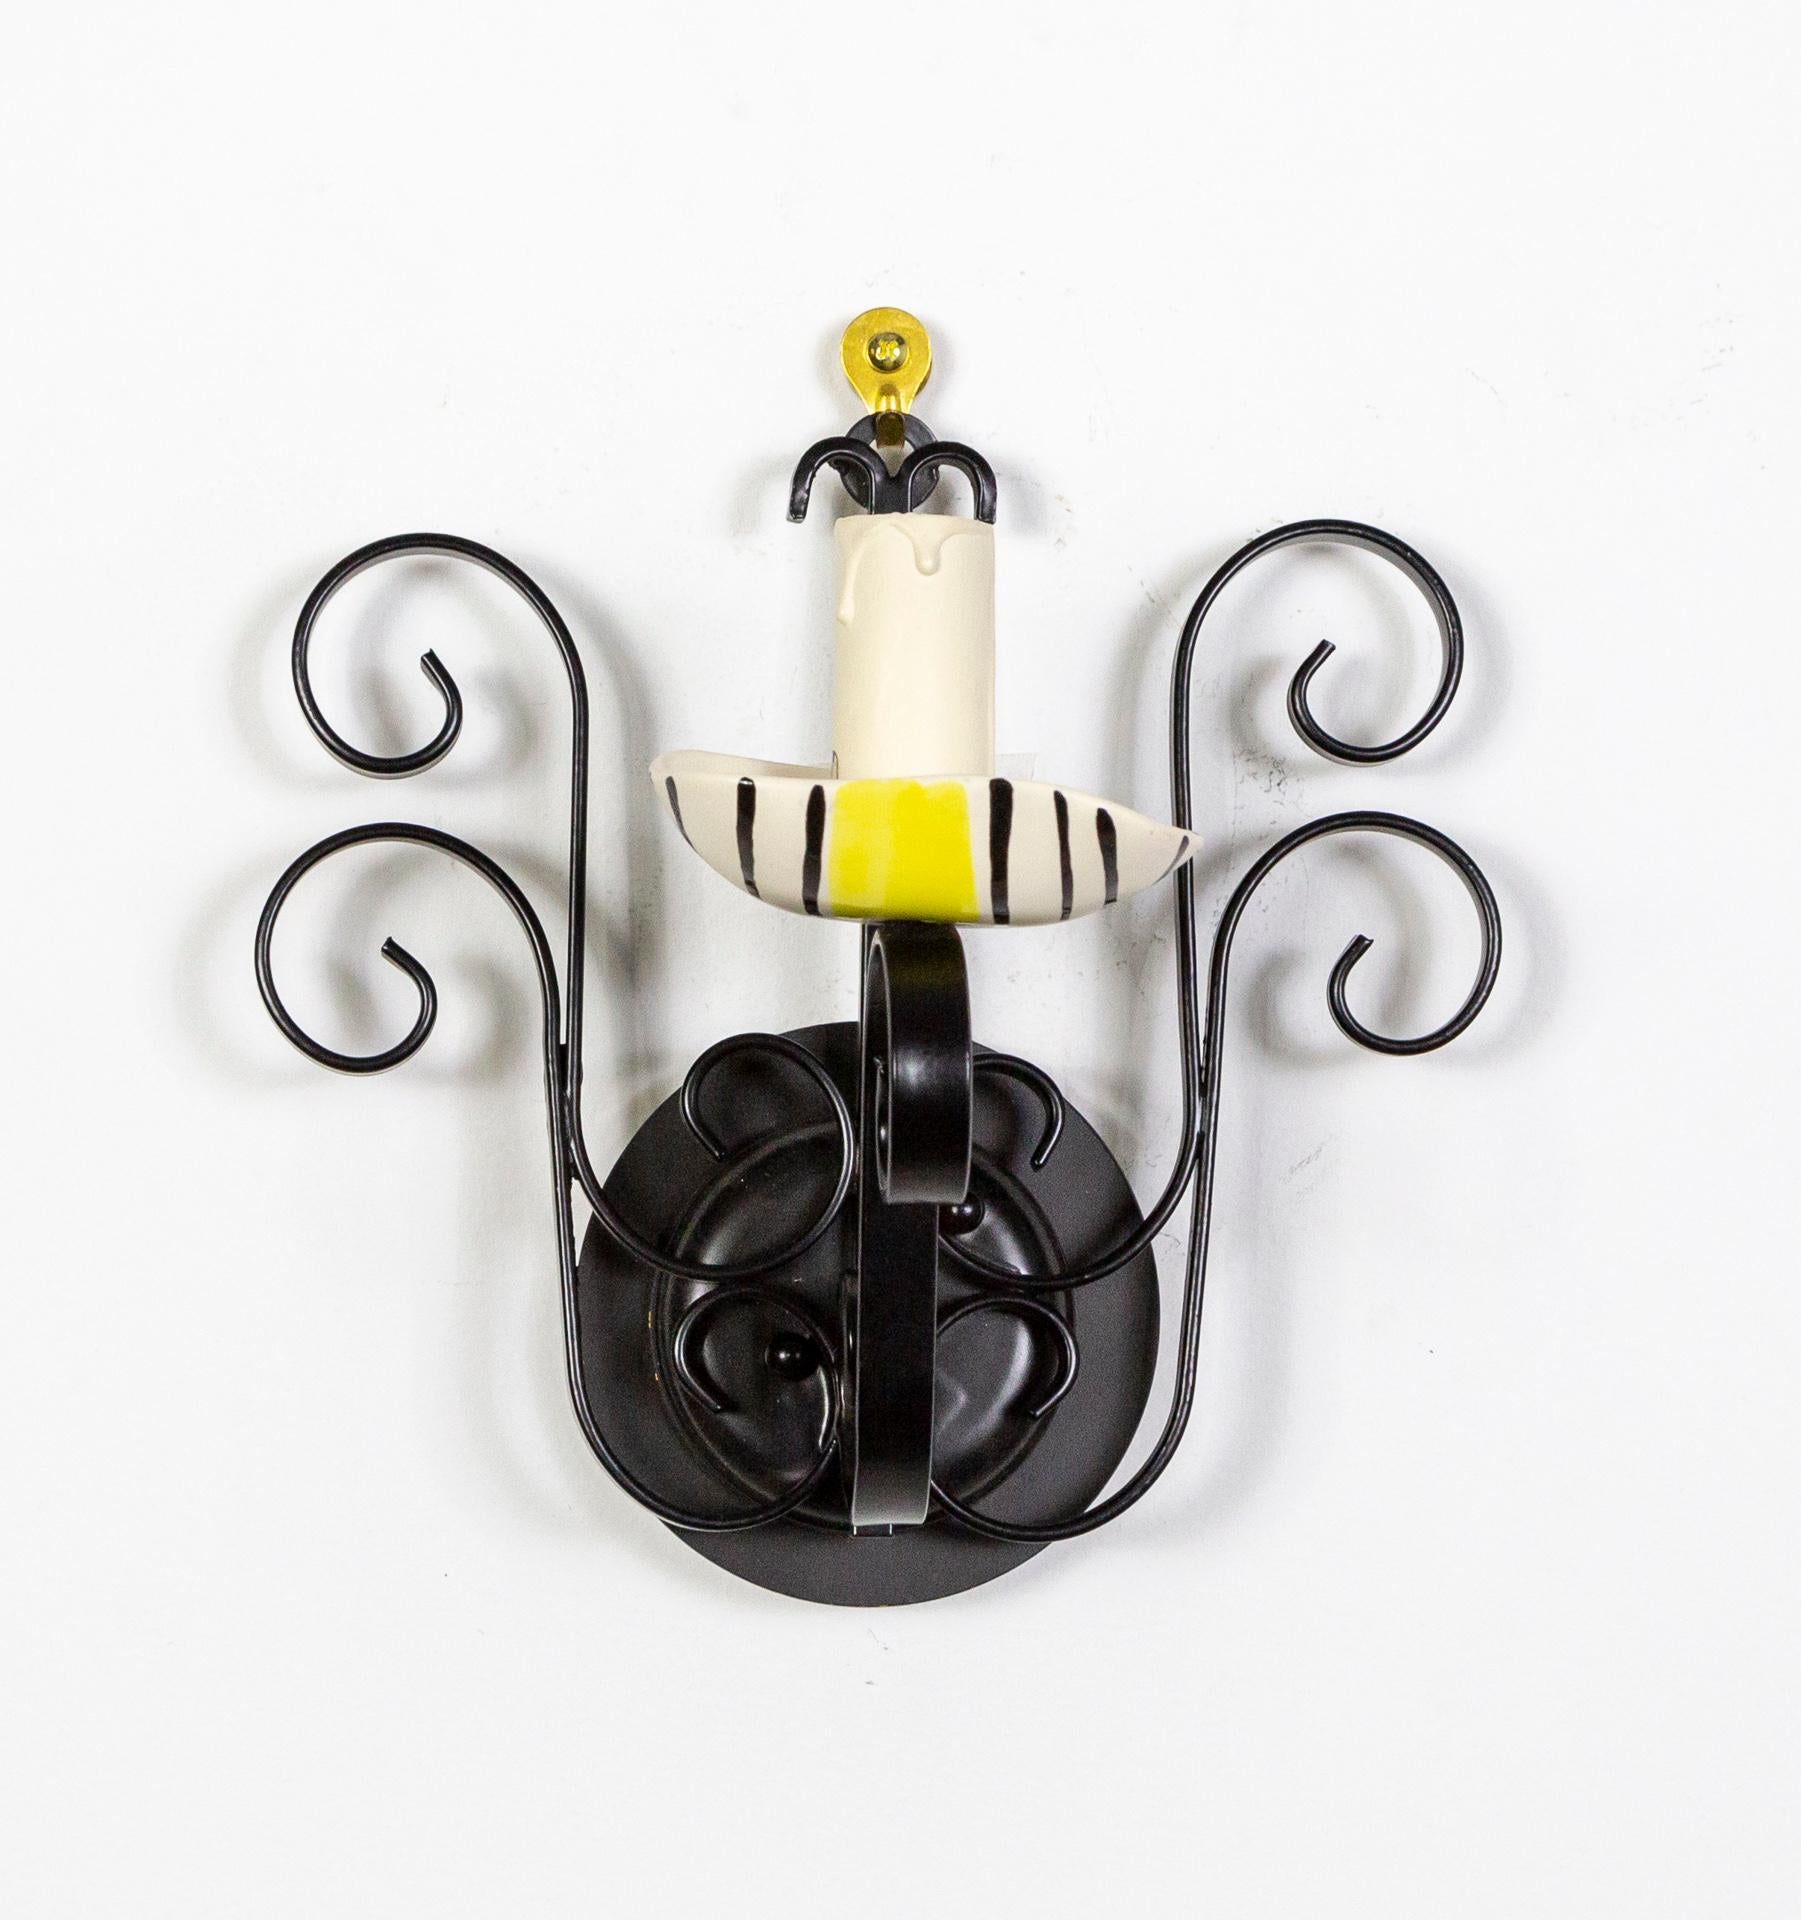 A set of 4 collectible wall lights by Ecole de Vallauris. Each sconce is composed of black-laquered wrought iron; with four S-curves on a circular backplate and a fifth holding an asymmetrical, handmade candle cup. Each bobeche is unique, hand